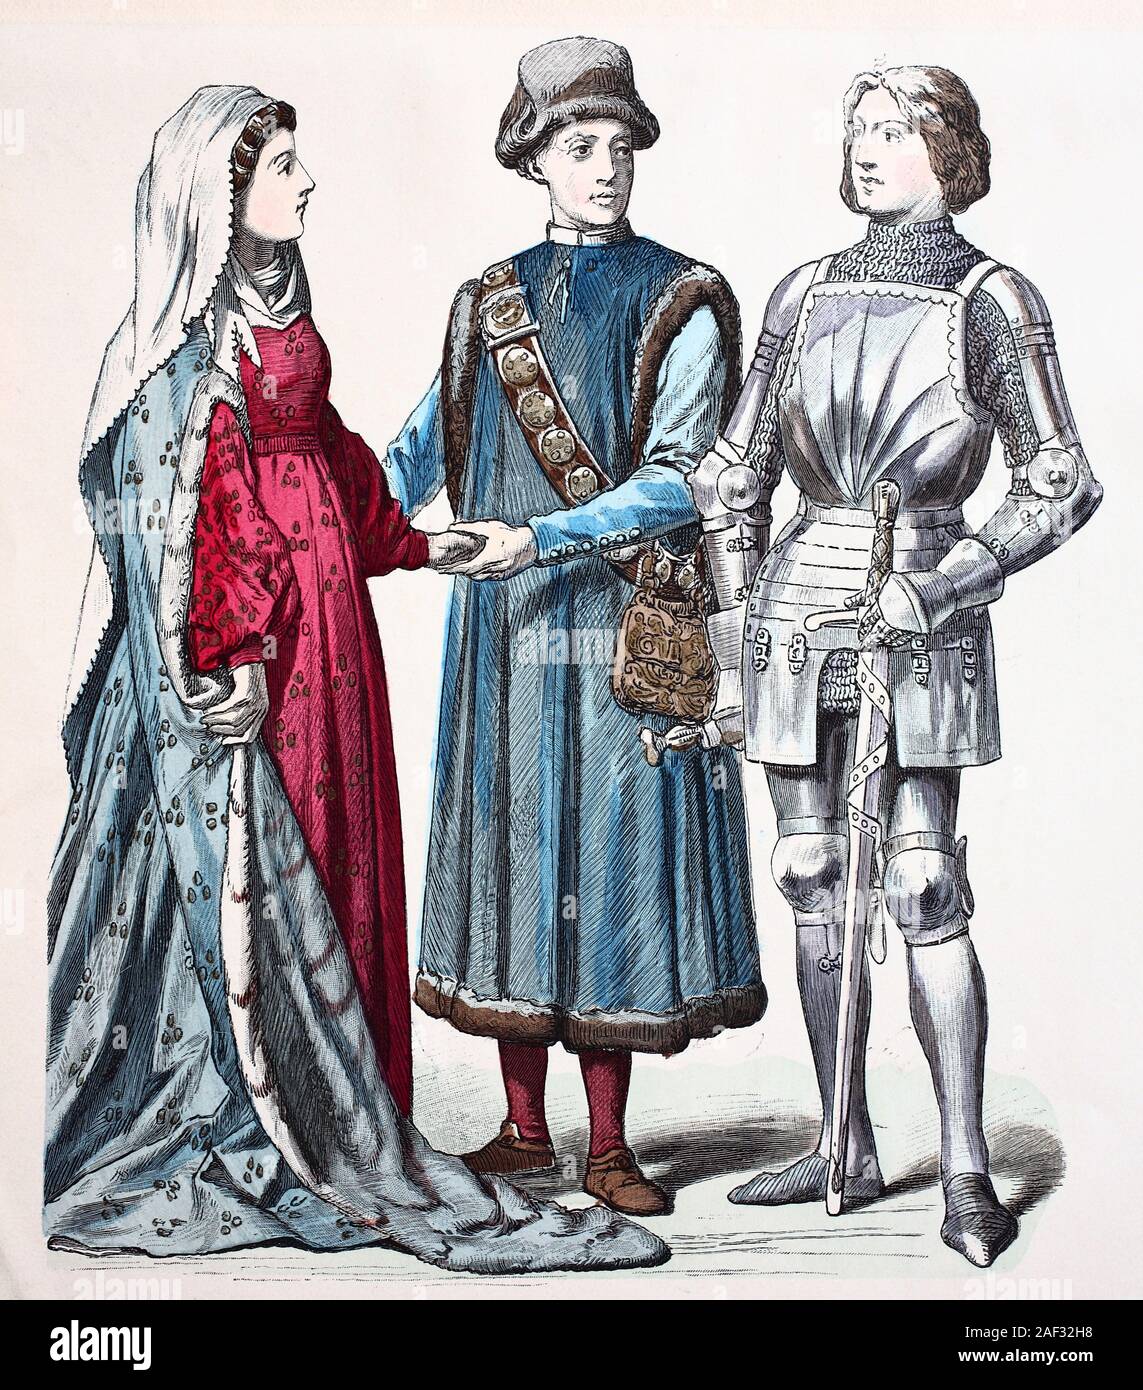 National costume, clothes, history of the costumes, women's national  costume, in 1450, citizen of the city of castle Ravens, in 1429 and knight  of mountain Stetten, in 1428, Germany, Volkstracht, Kleidung, Geschichte